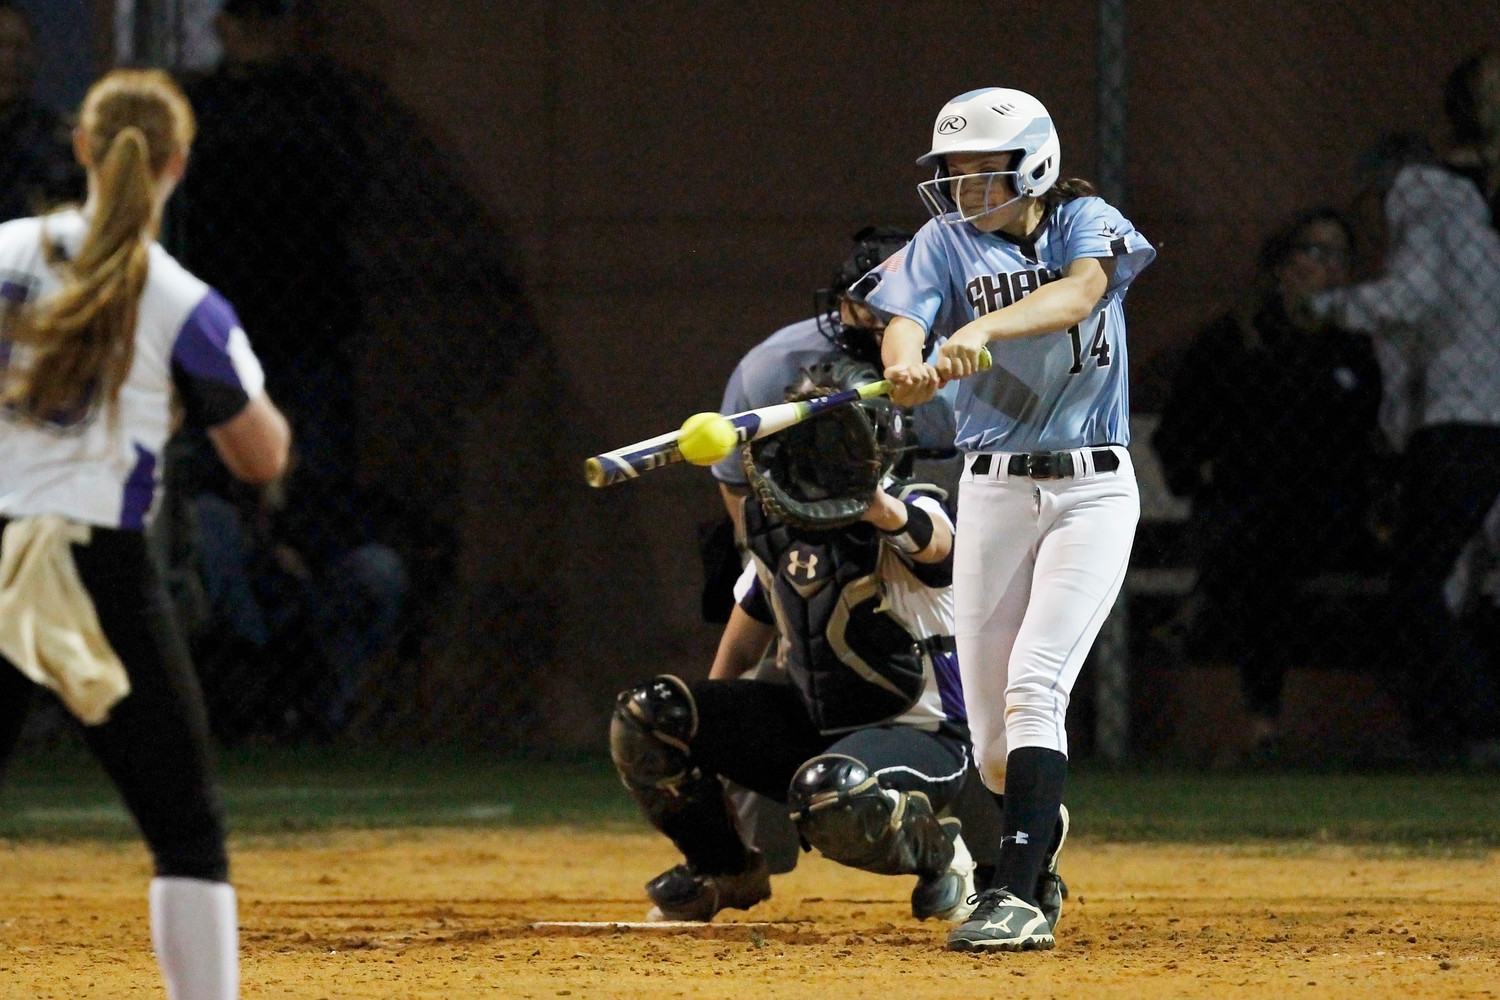 Cat Beaton connects on one of her two hits in the game.